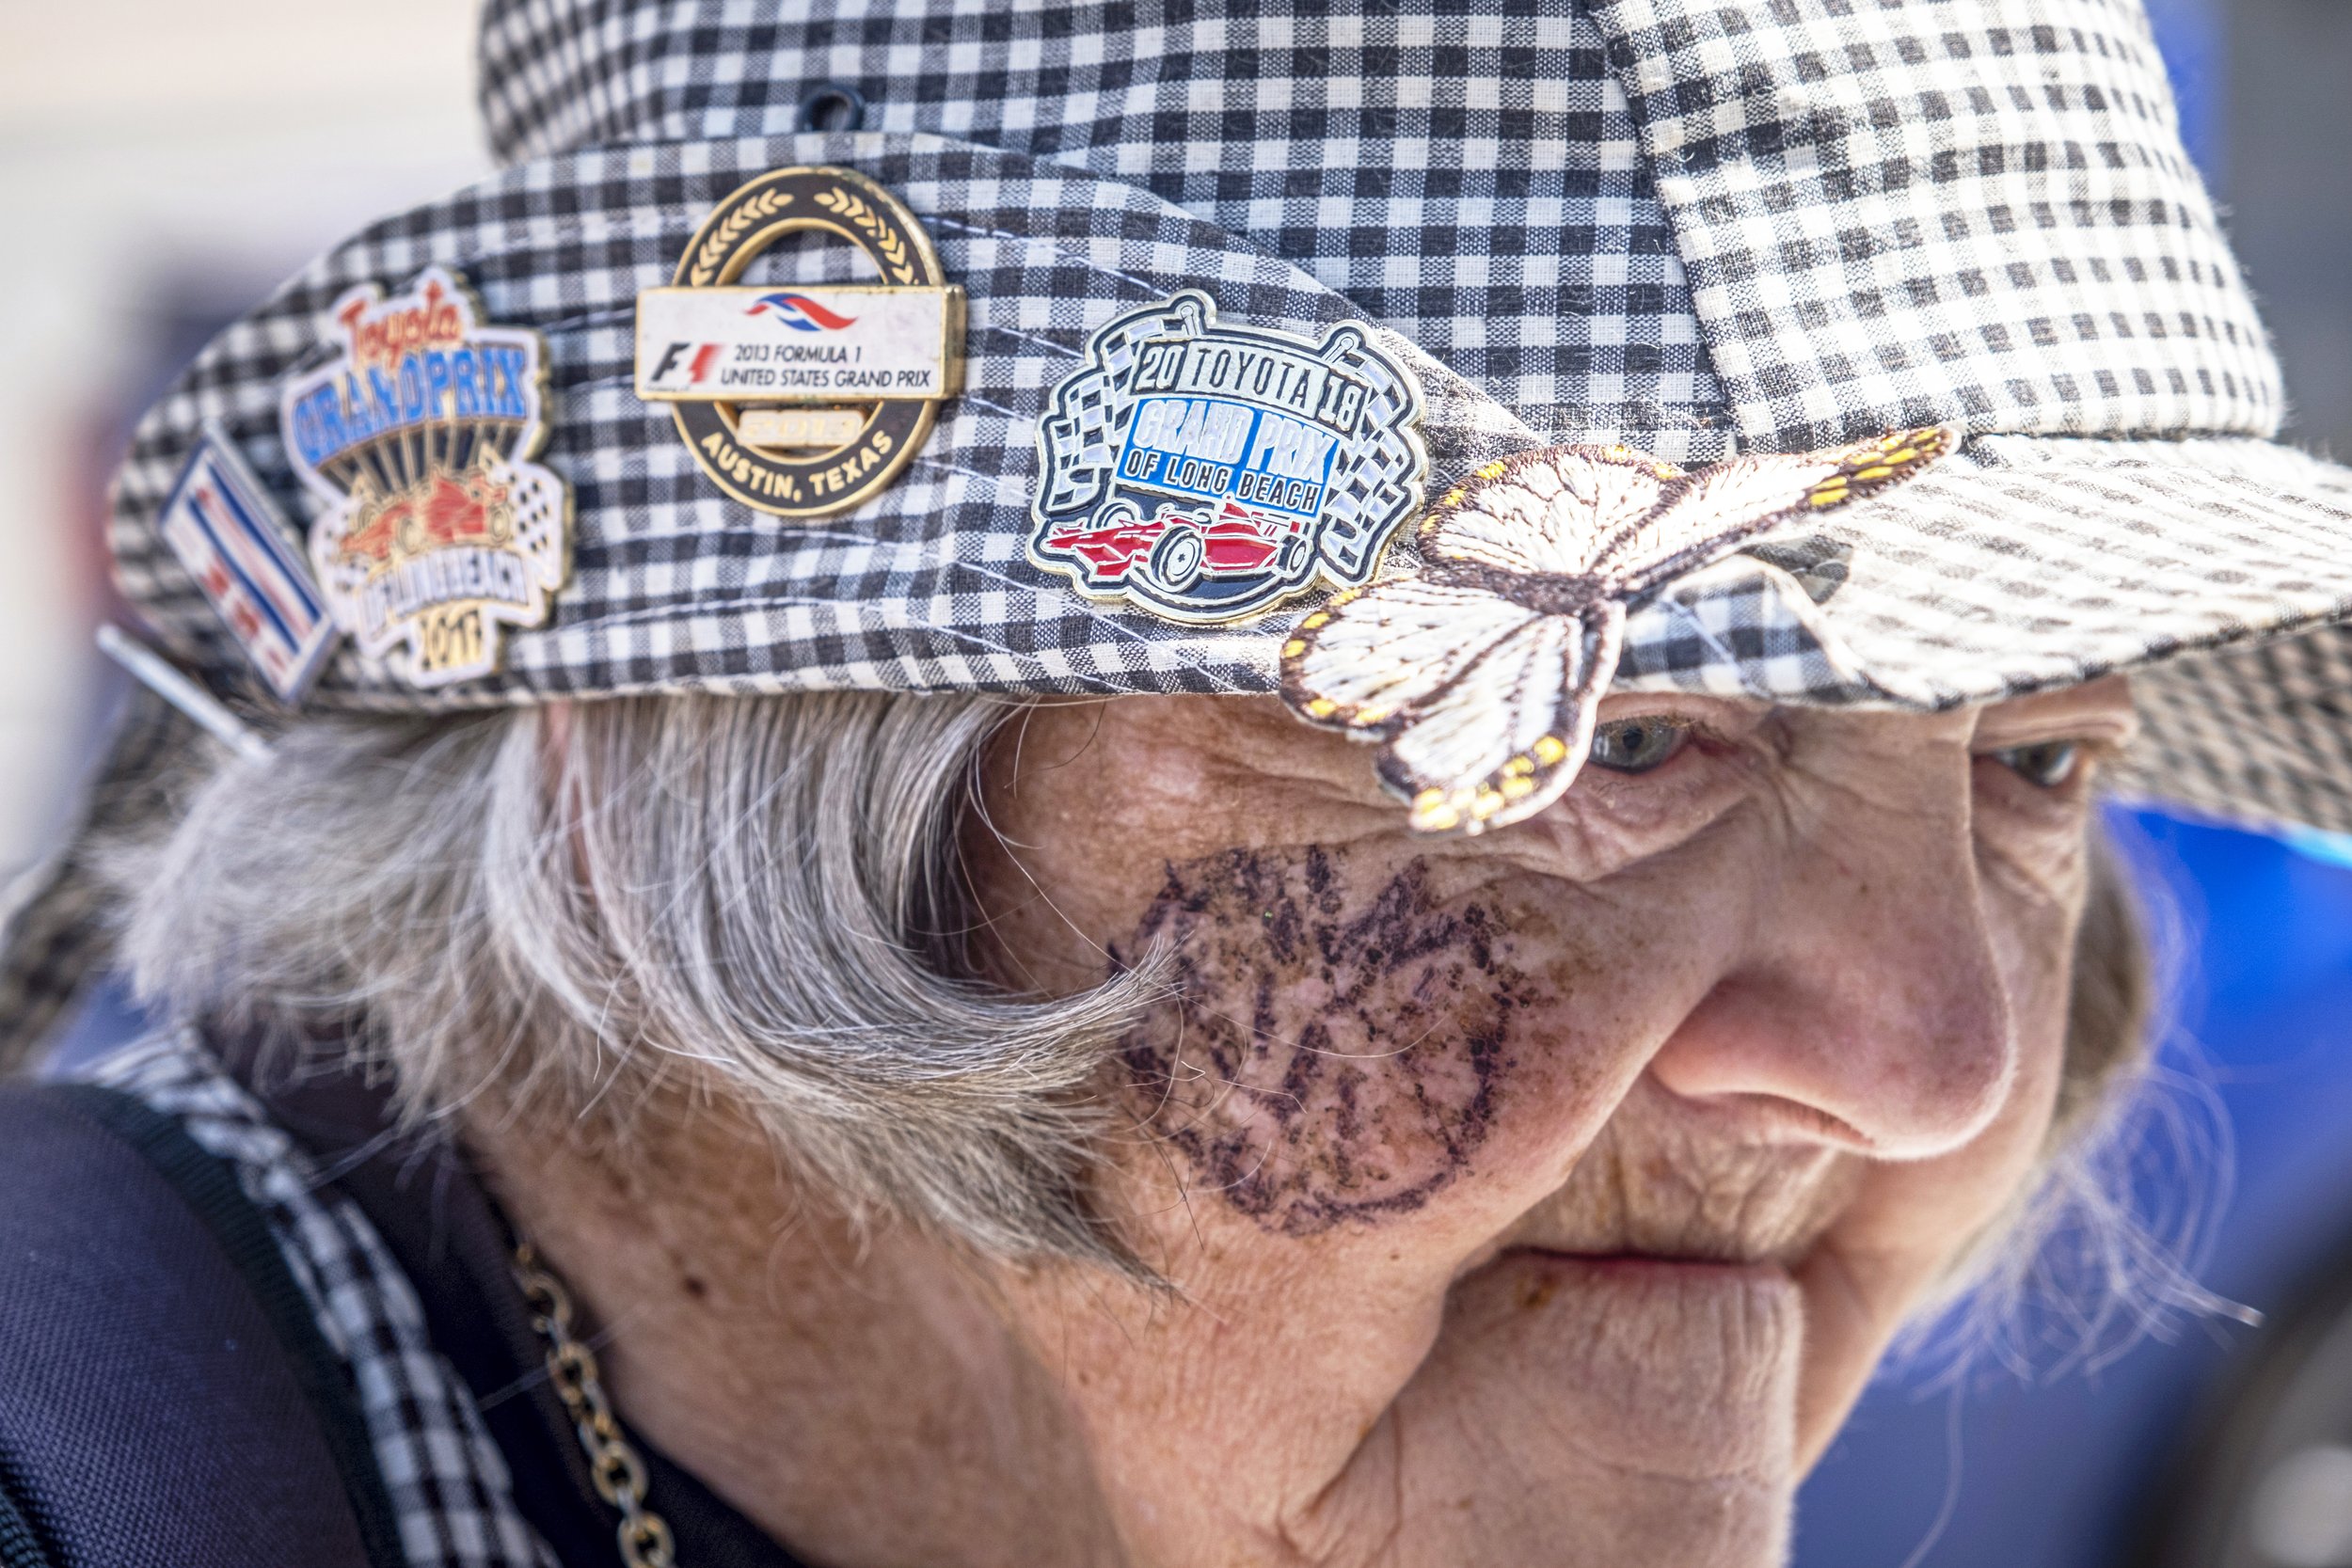  George-Lyn wears her “Grand Prix outfit” and sports pins of past races on her hat. Ocean Boulevard outside of the 48th Annual Acura Grand Prix in Long Beach, Calif. on Sat., April 15, 2023. (Anna Sophia Moltke | The Corsair) 